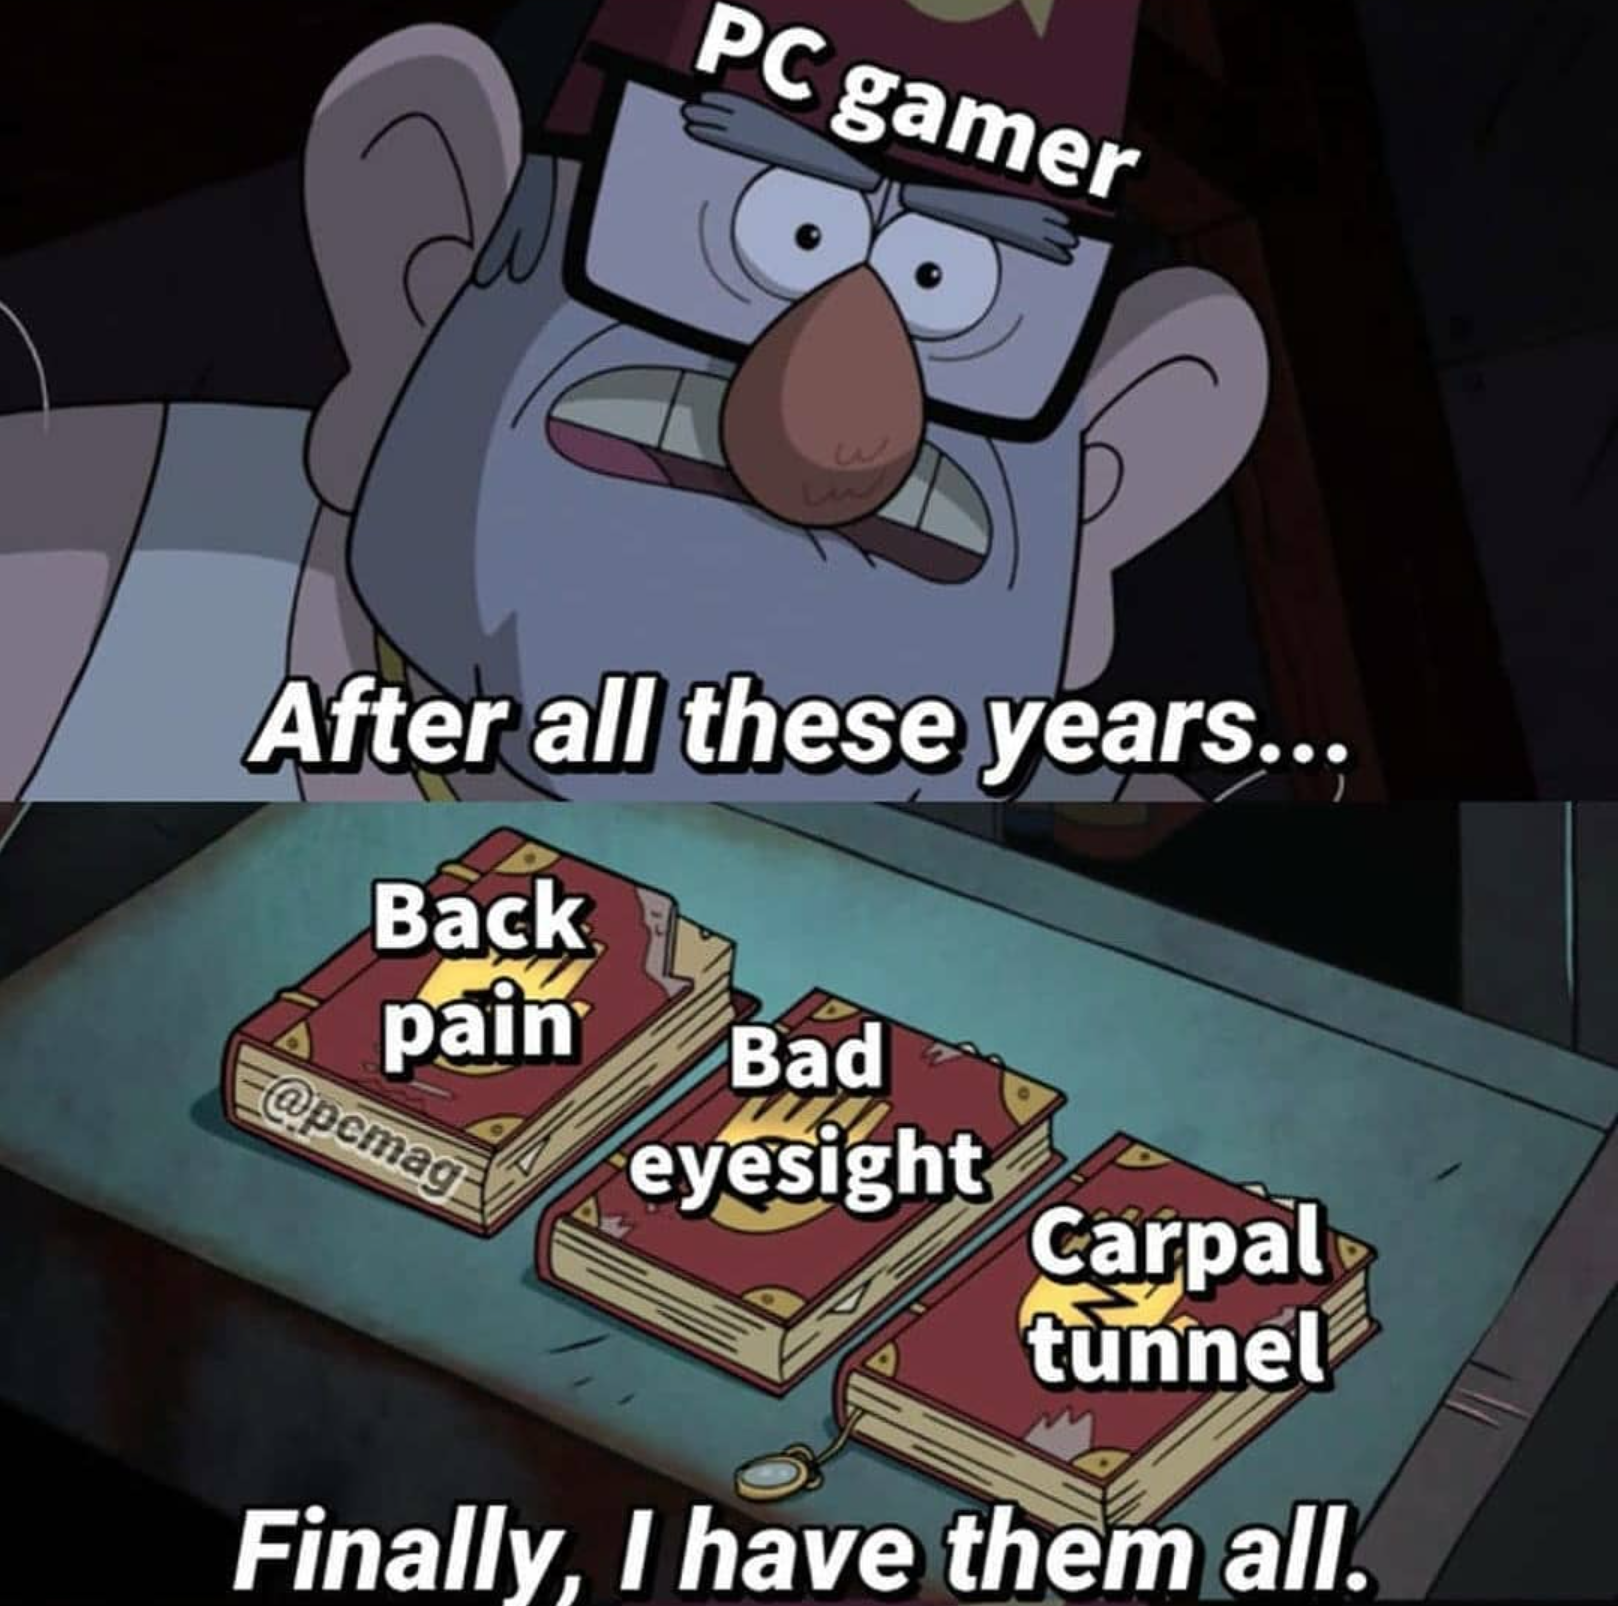 funny gaming memes - games - Pc gamer After all these years... Back pain Bad eyesight Carpal tunnel Finally, I have them all.